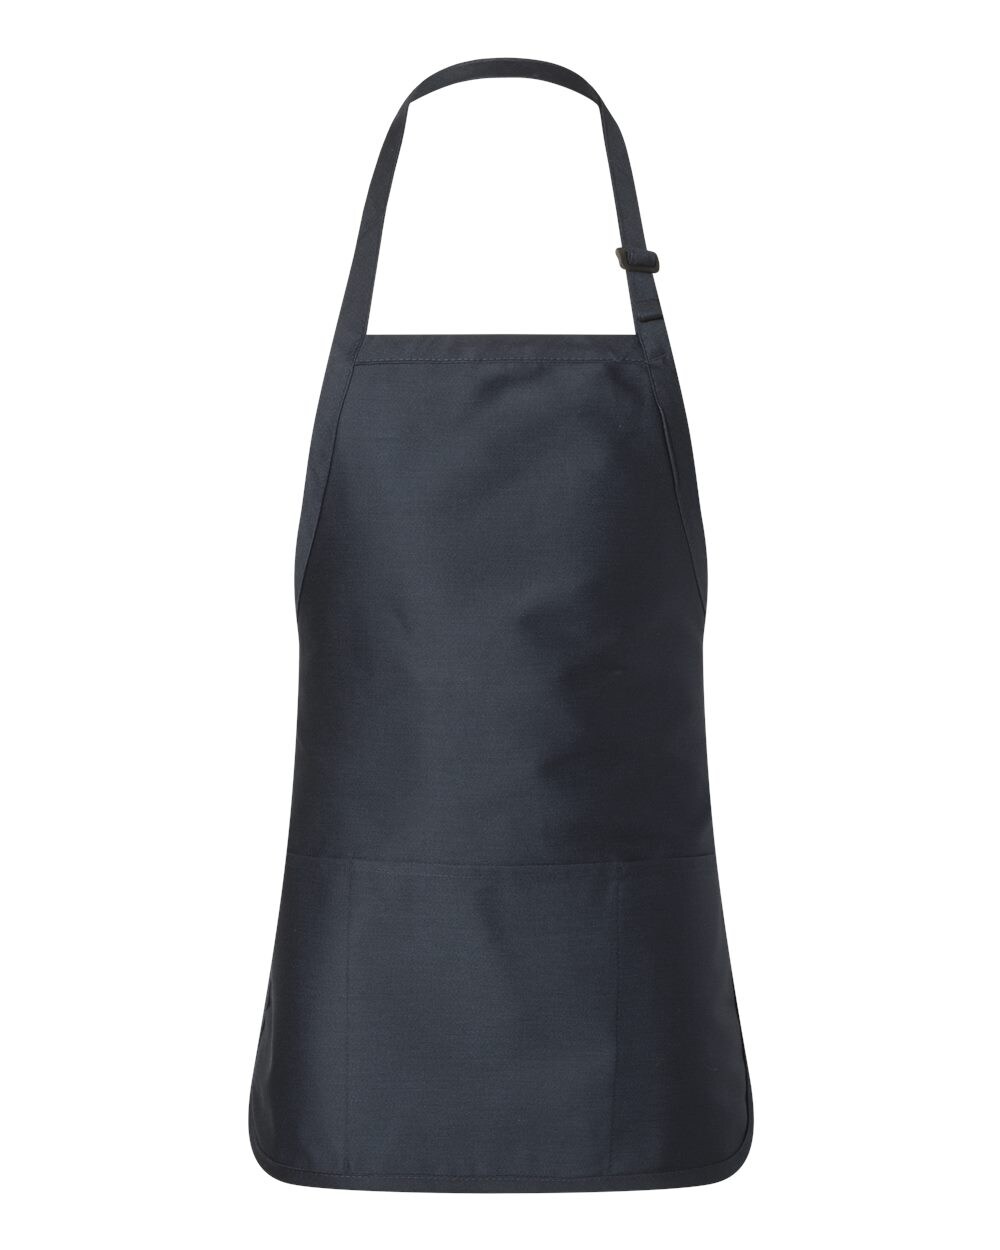 Full-Length Apron with Pouch Pocket | RADYAN®